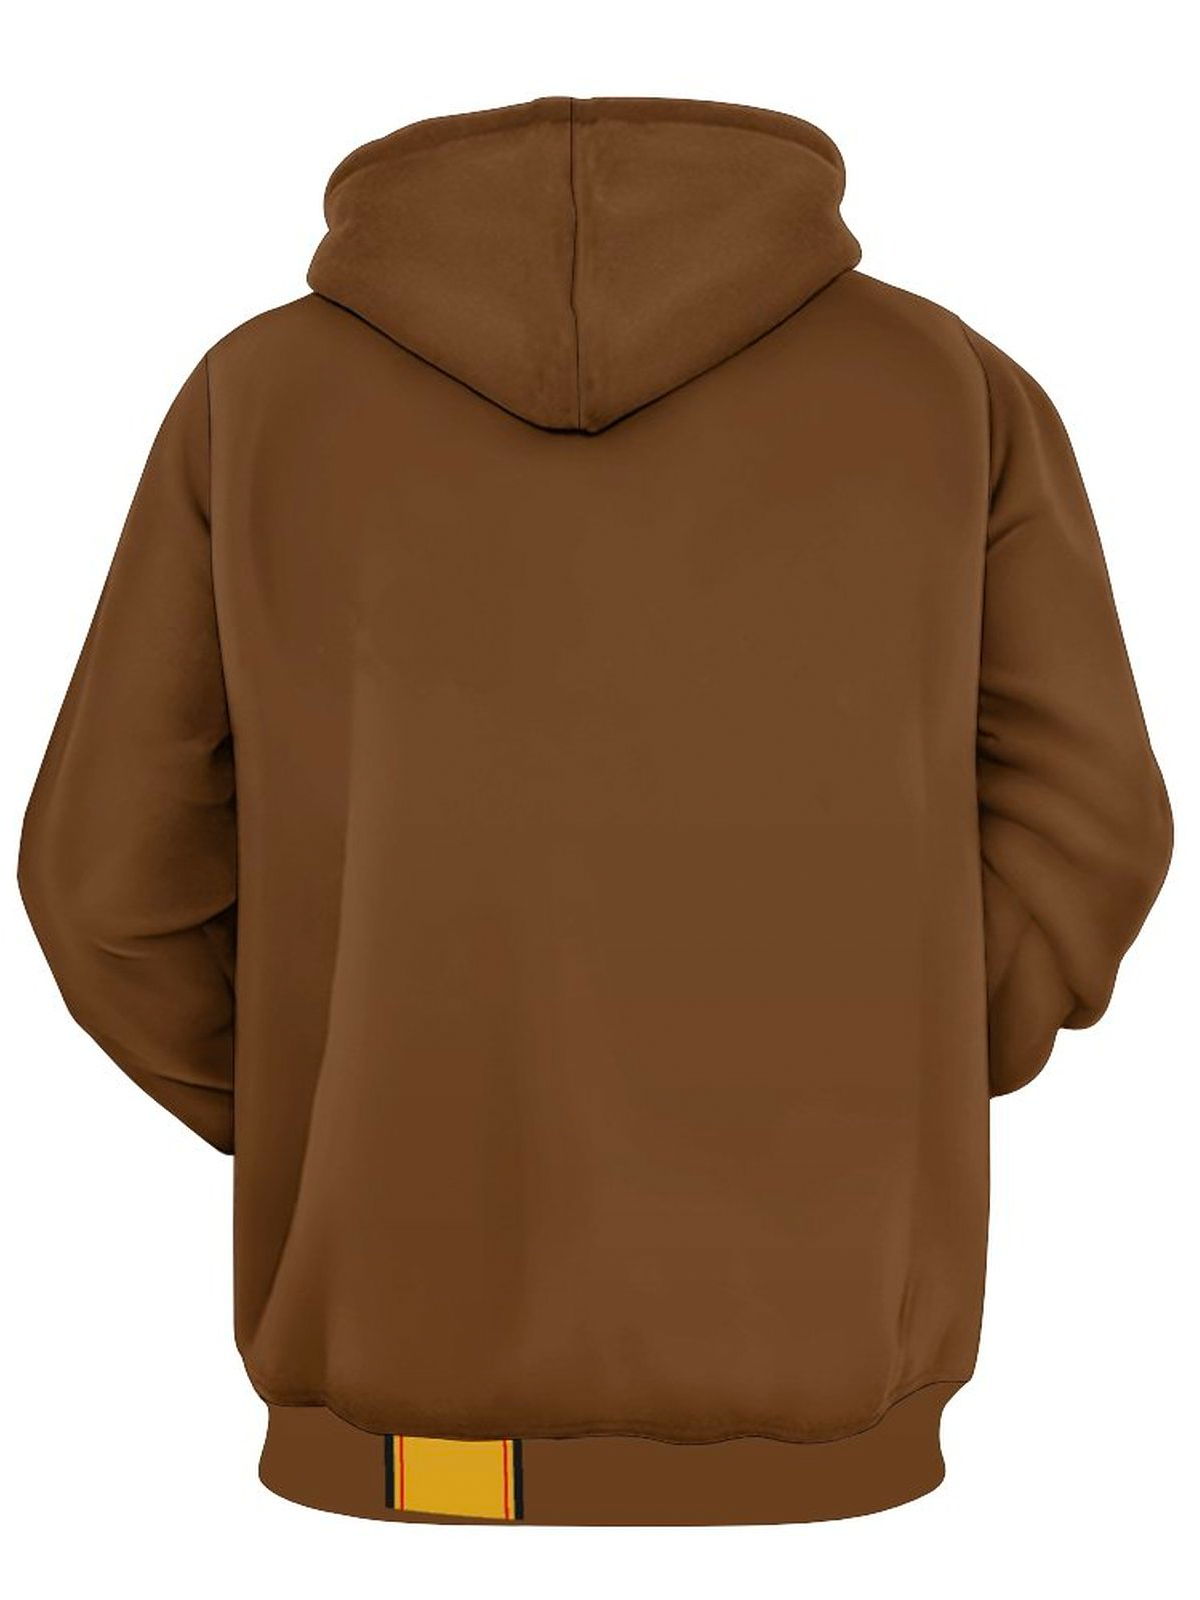 Gobble Gobble Turkey Loose Casual Hoodie